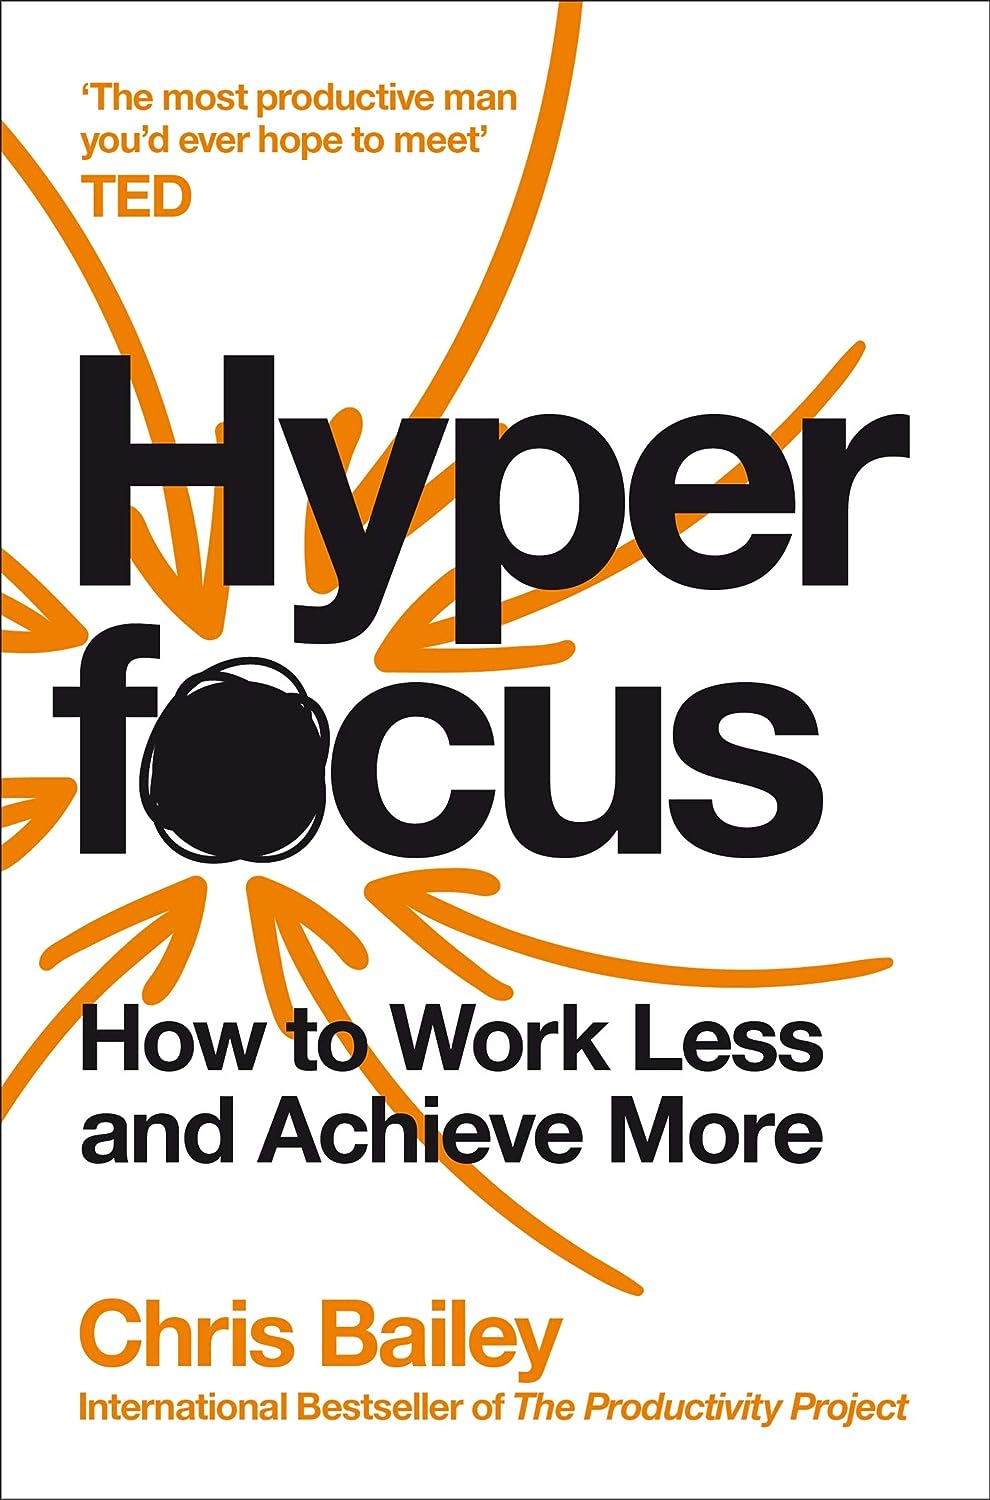 Hyperfocus: How to Work Less to Achieve More